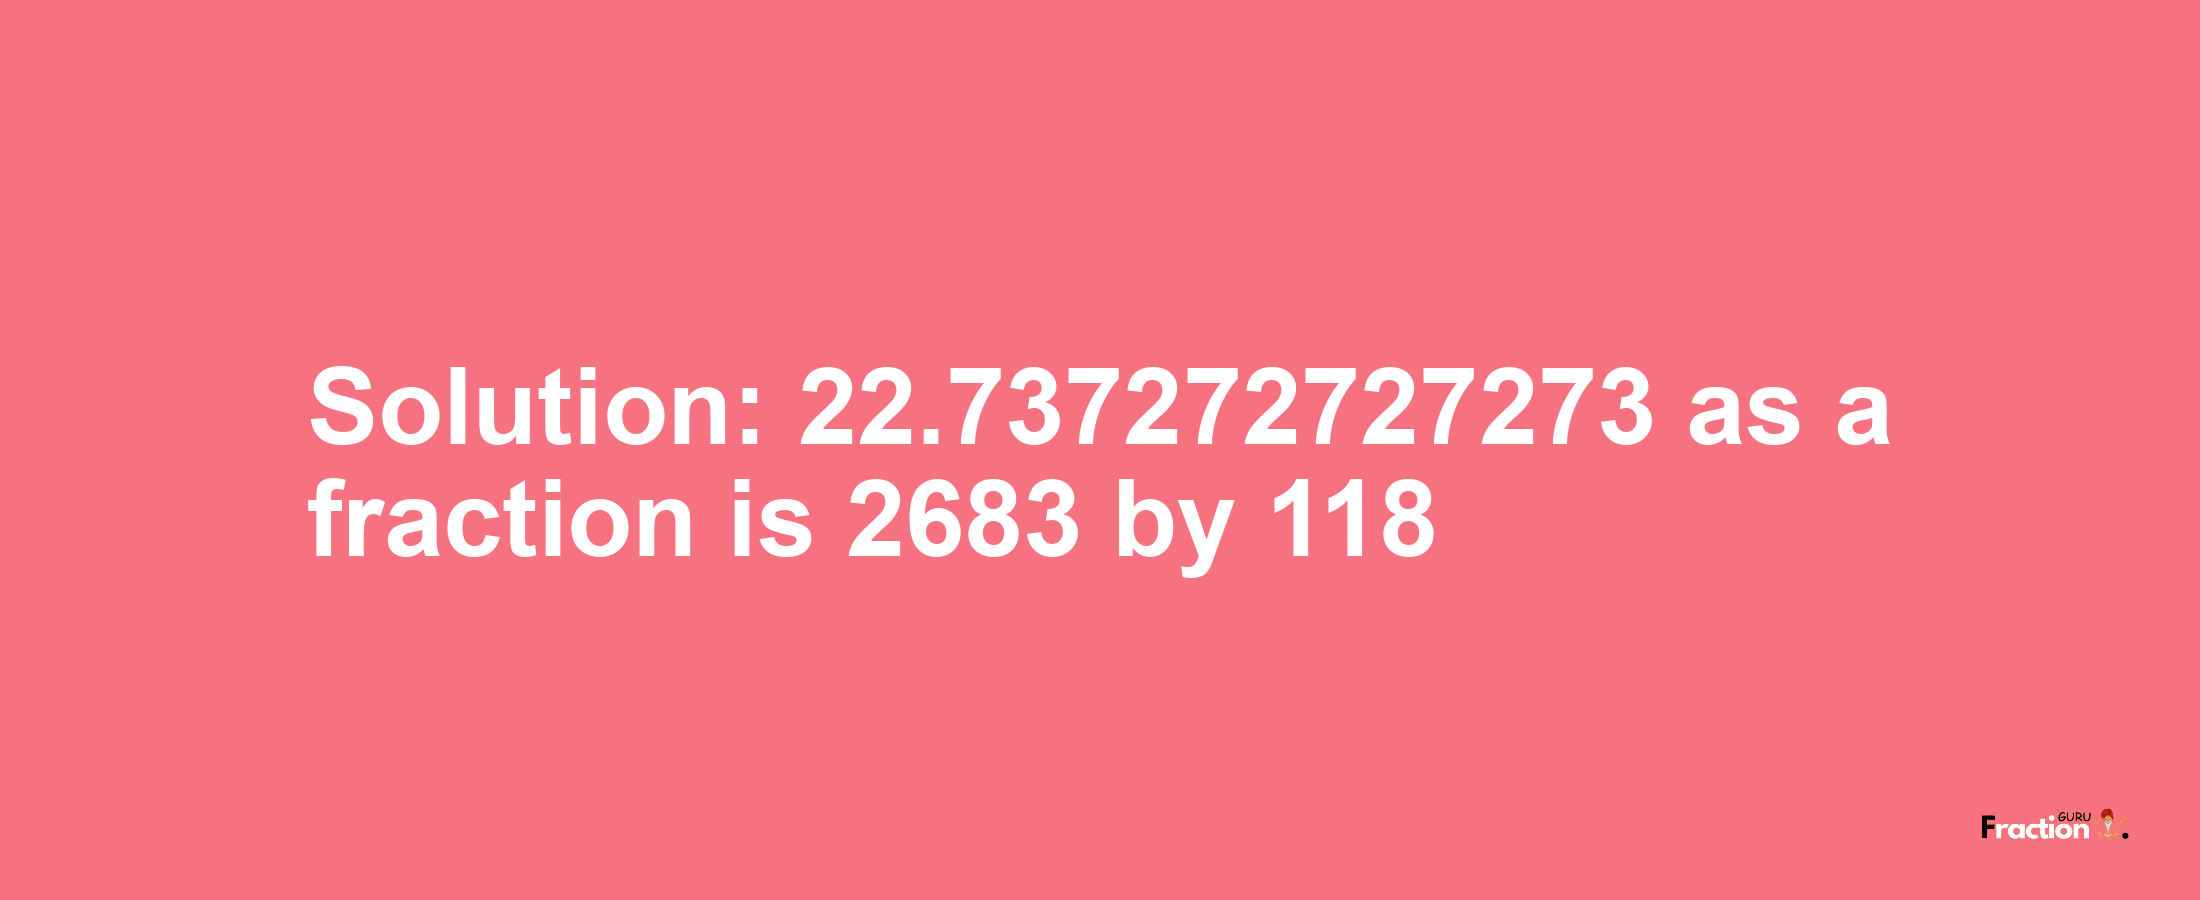 Solution:22.737272727273 as a fraction is 2683/118